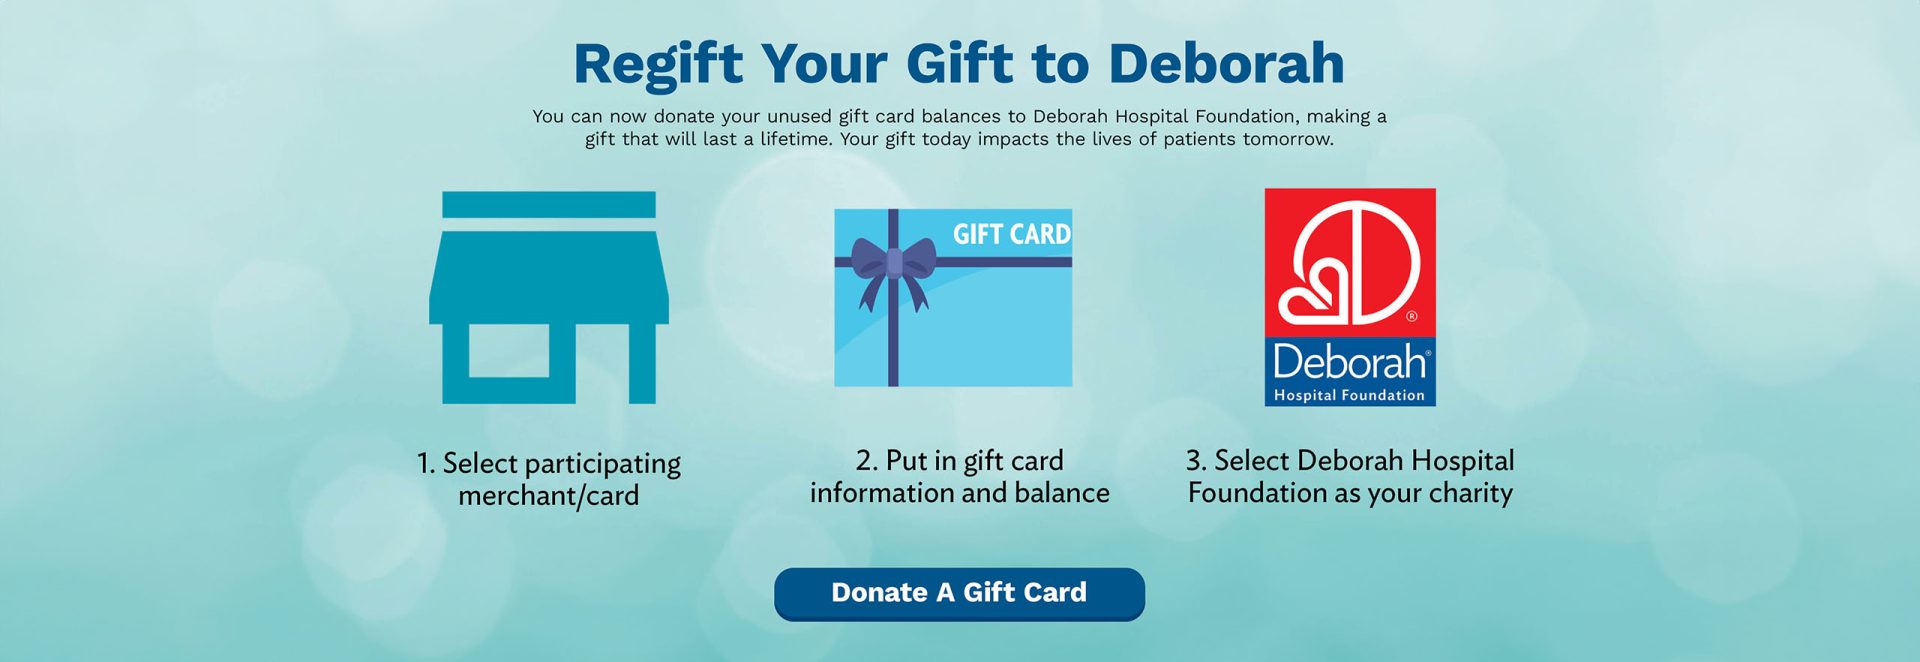 Regift Your Gift to Deborah | Donate A Gift Card